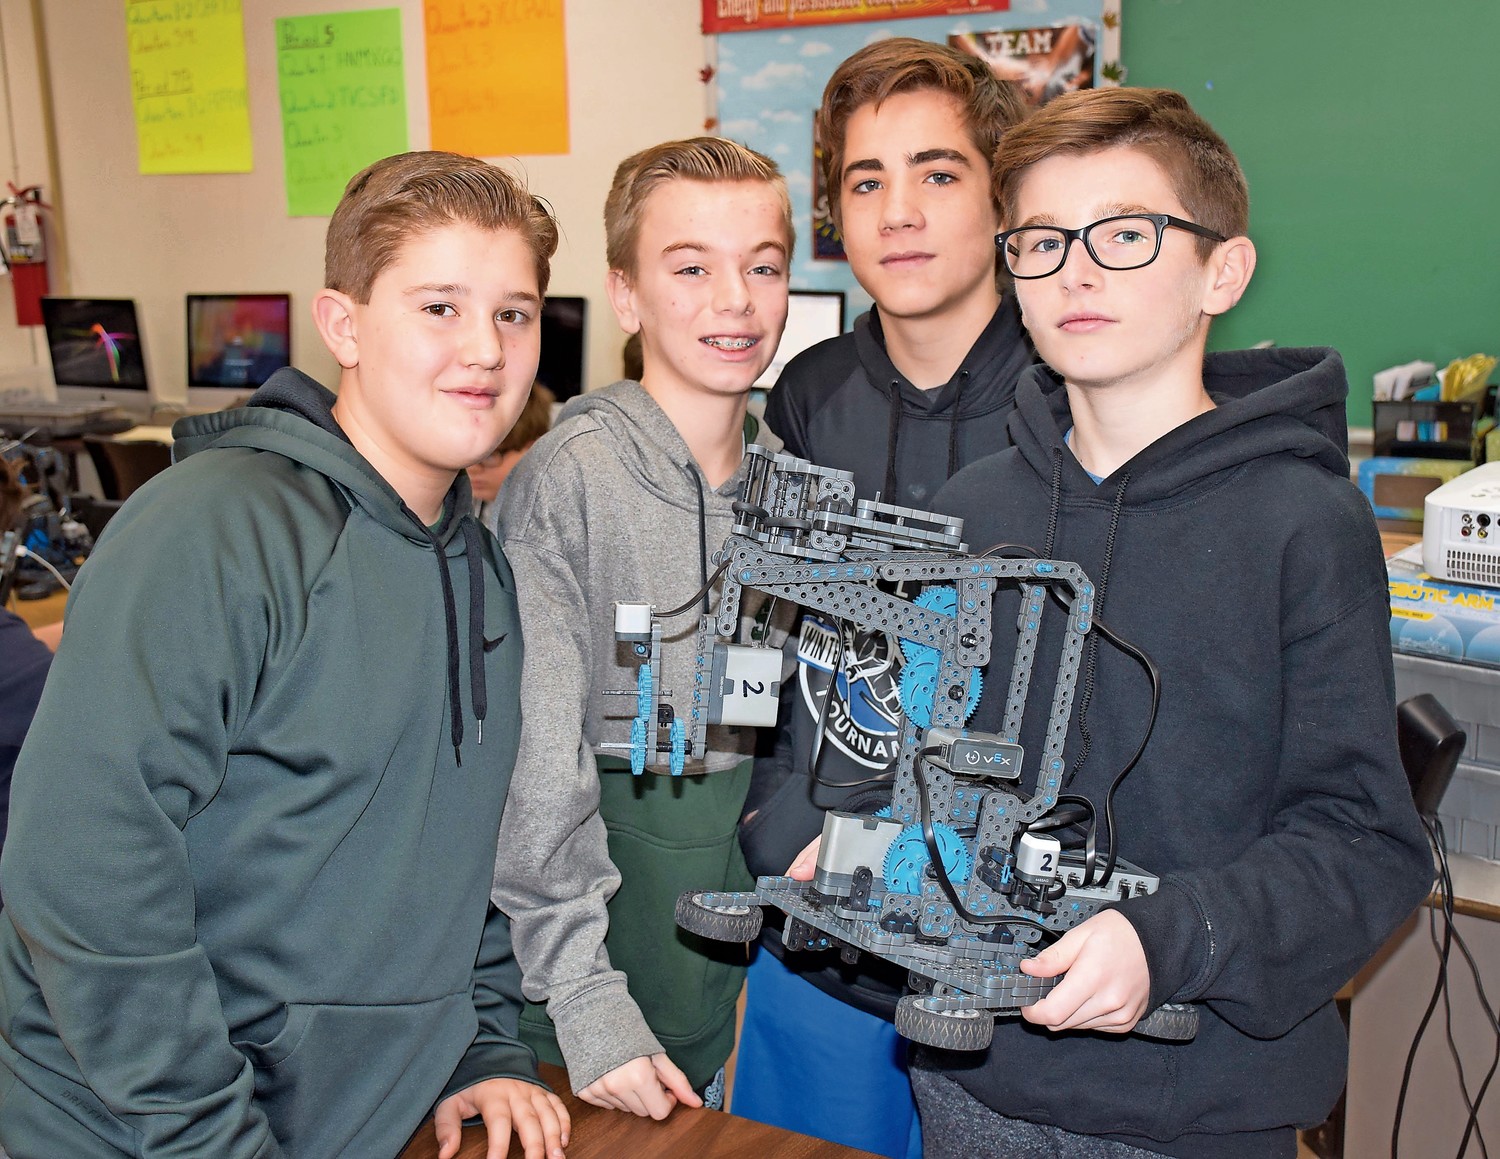 Seaford Middle School eighth-graders, from left, Jimmy Manzick, Paul Anzelone, Evan Paccione and Brandon Owens learned about robotics in a new half-year technology course.